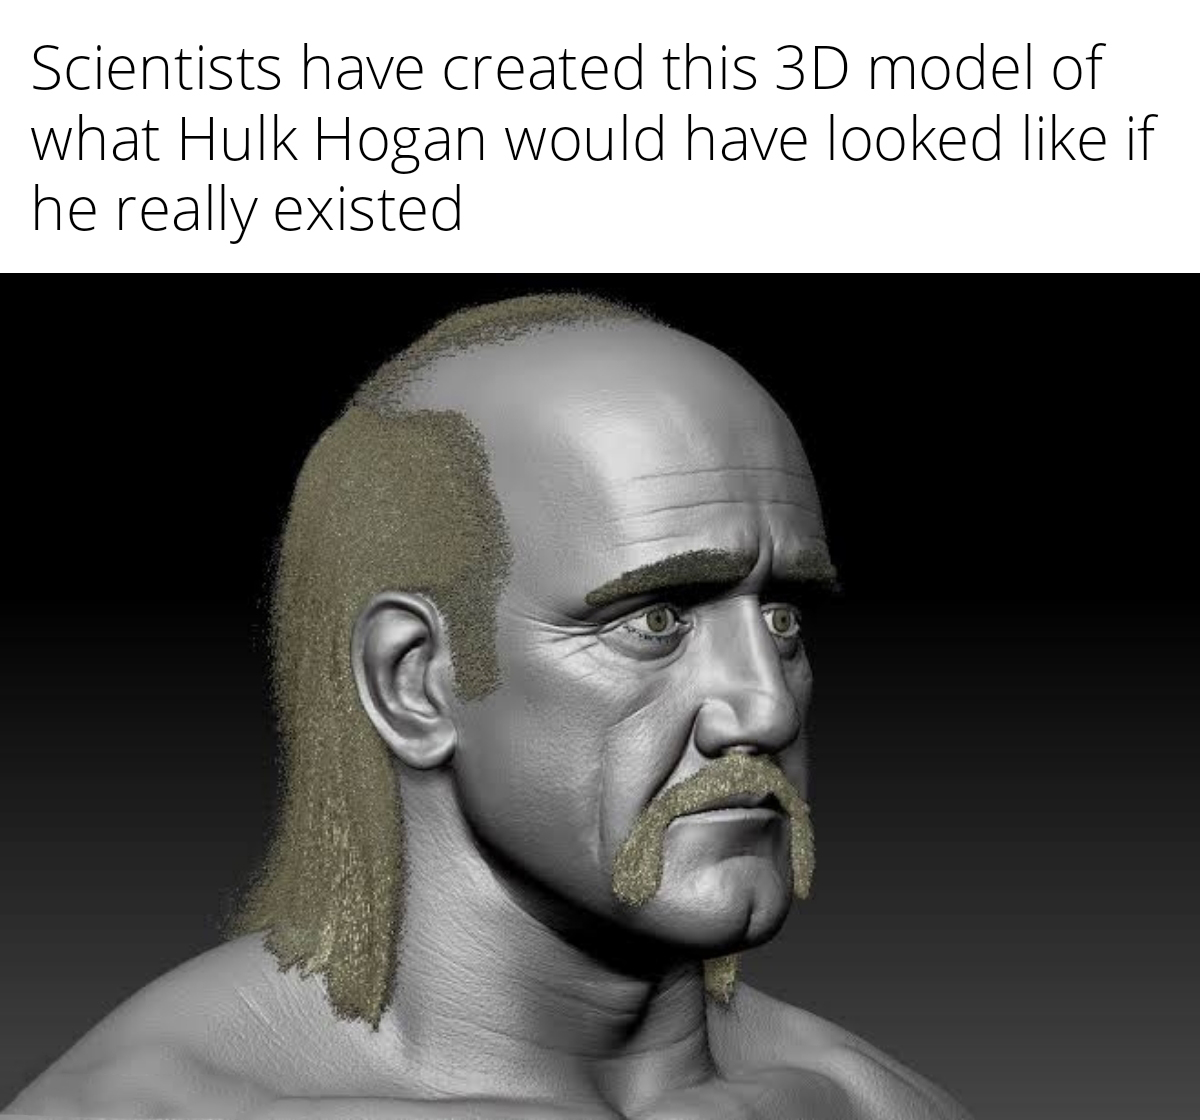 monday morning randomness - head - Scientists have created this 3D model of what Hulk Hogan would have looked if he really existed